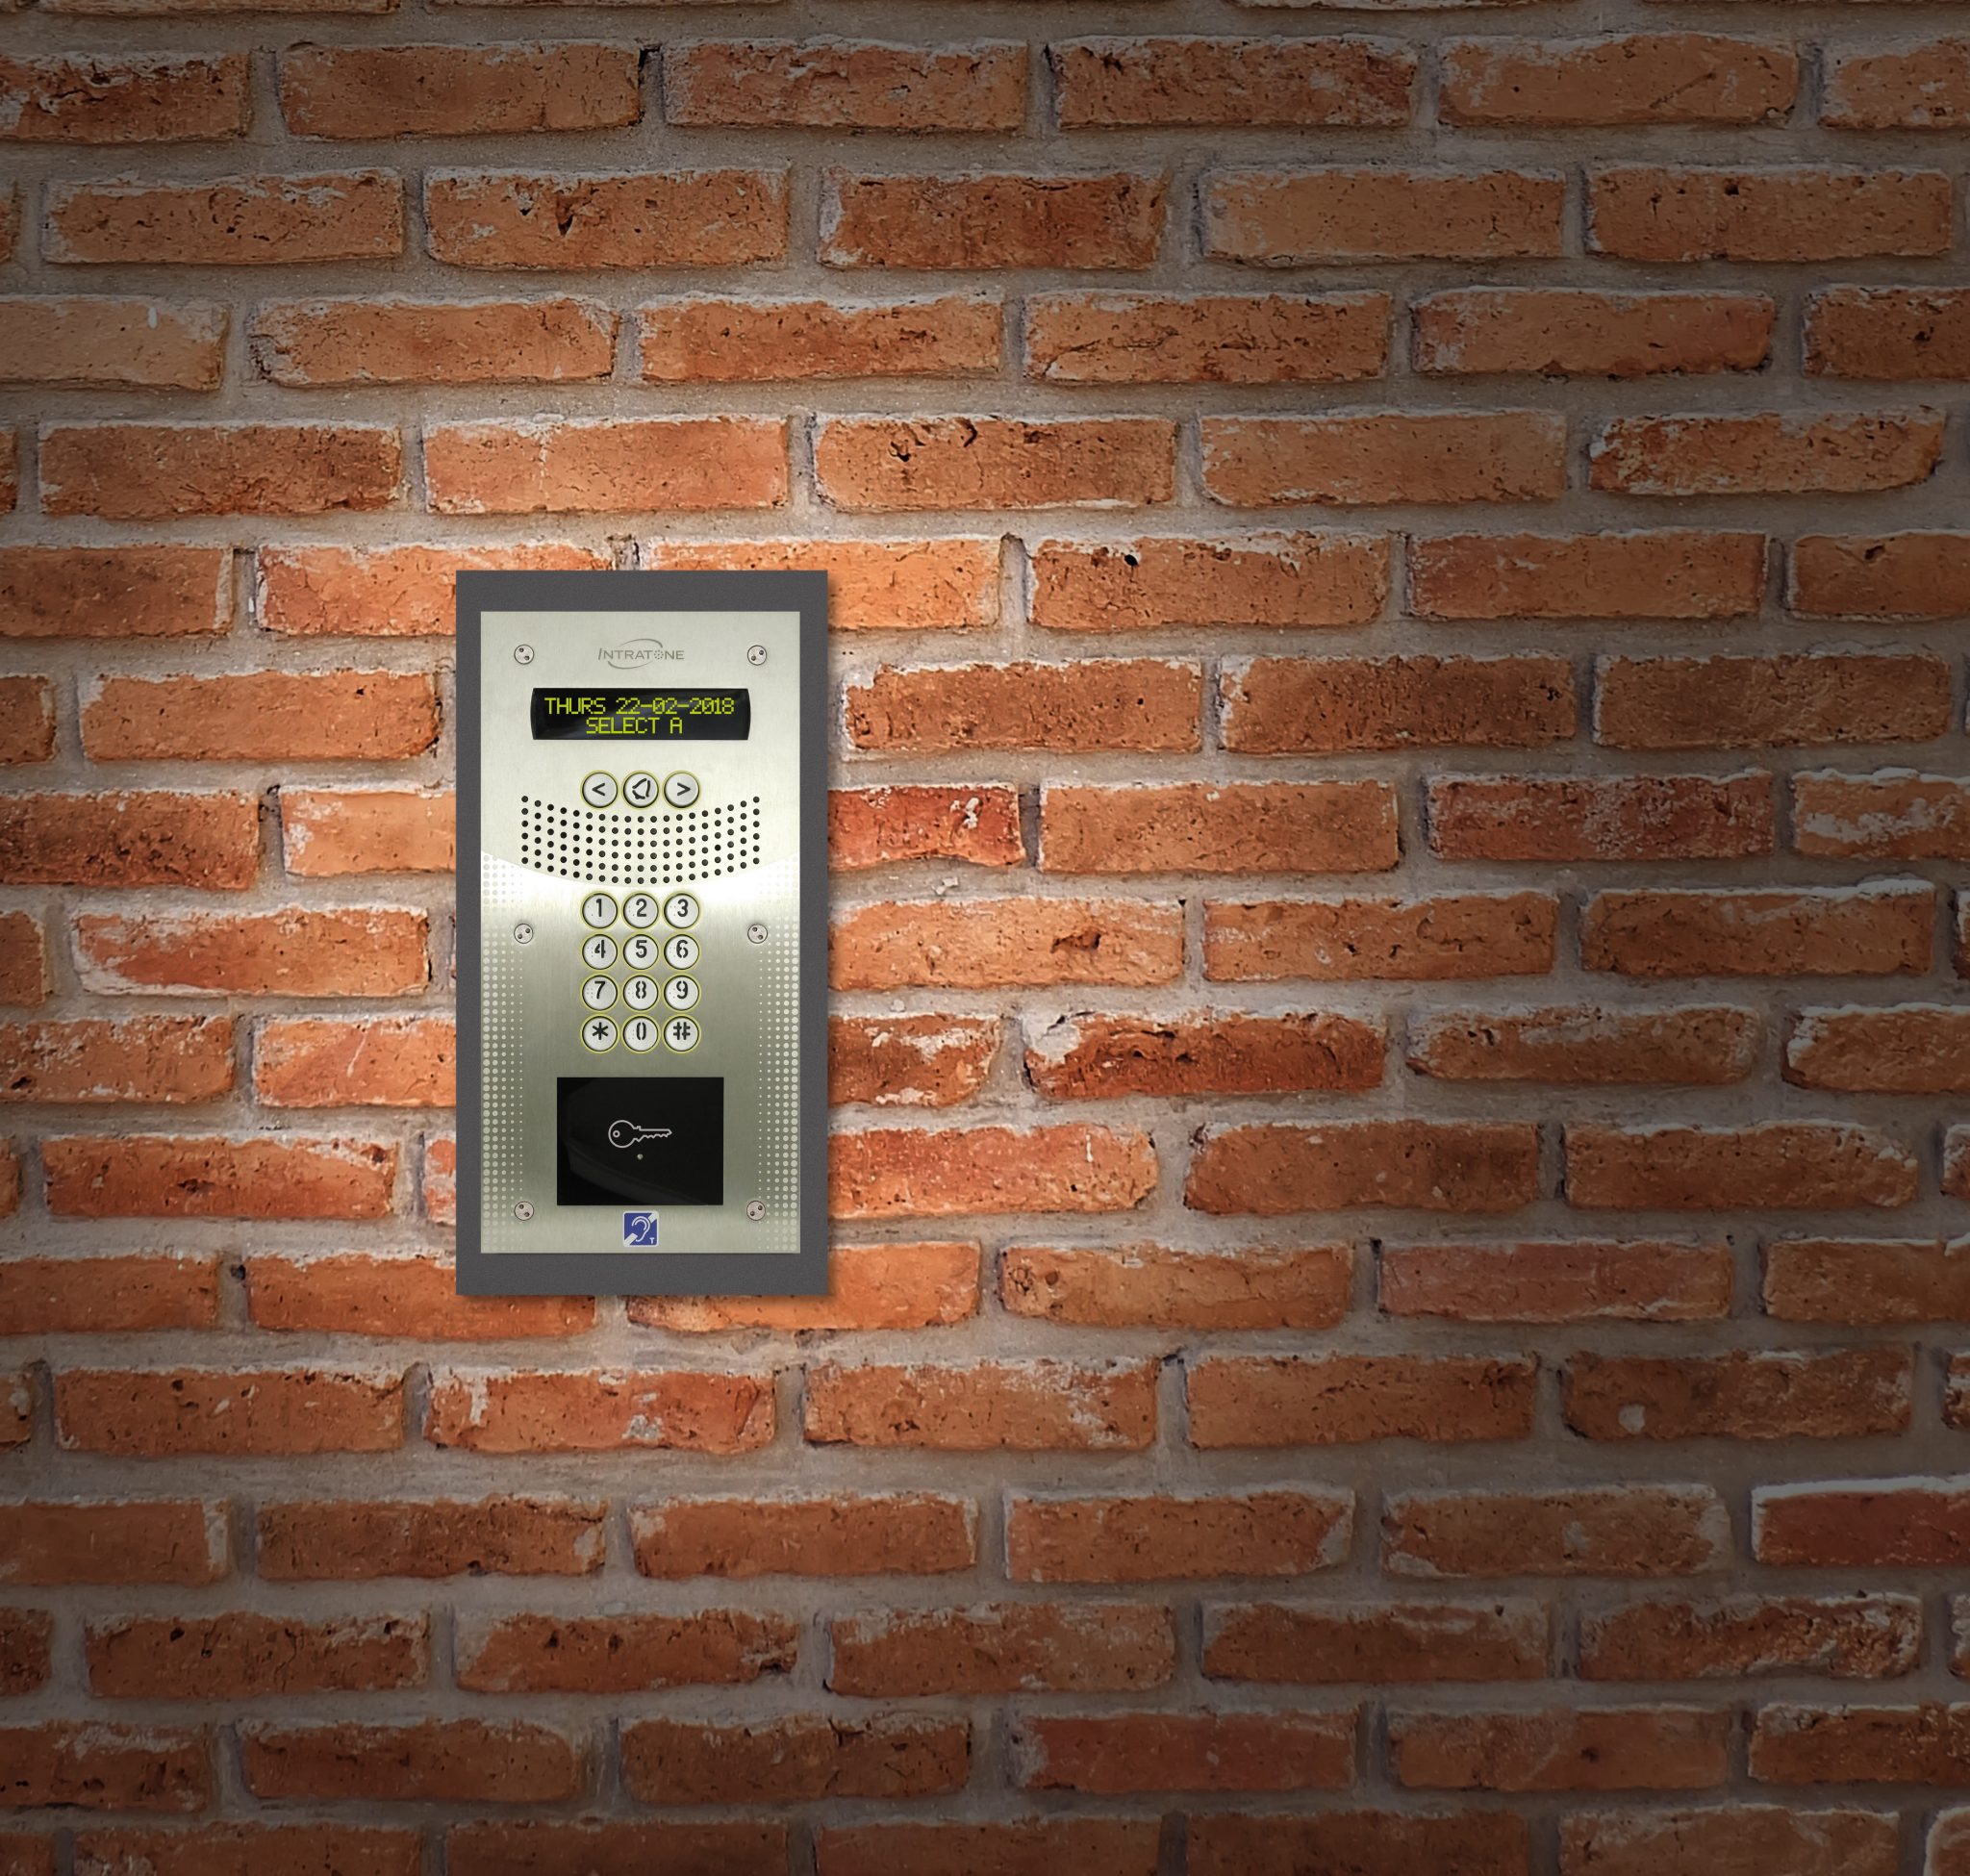 SUCCESSFUL TRIAL OF INTRATONE ACCESS CONTROL LEADS TO PORTFOLIO ROLL OUT